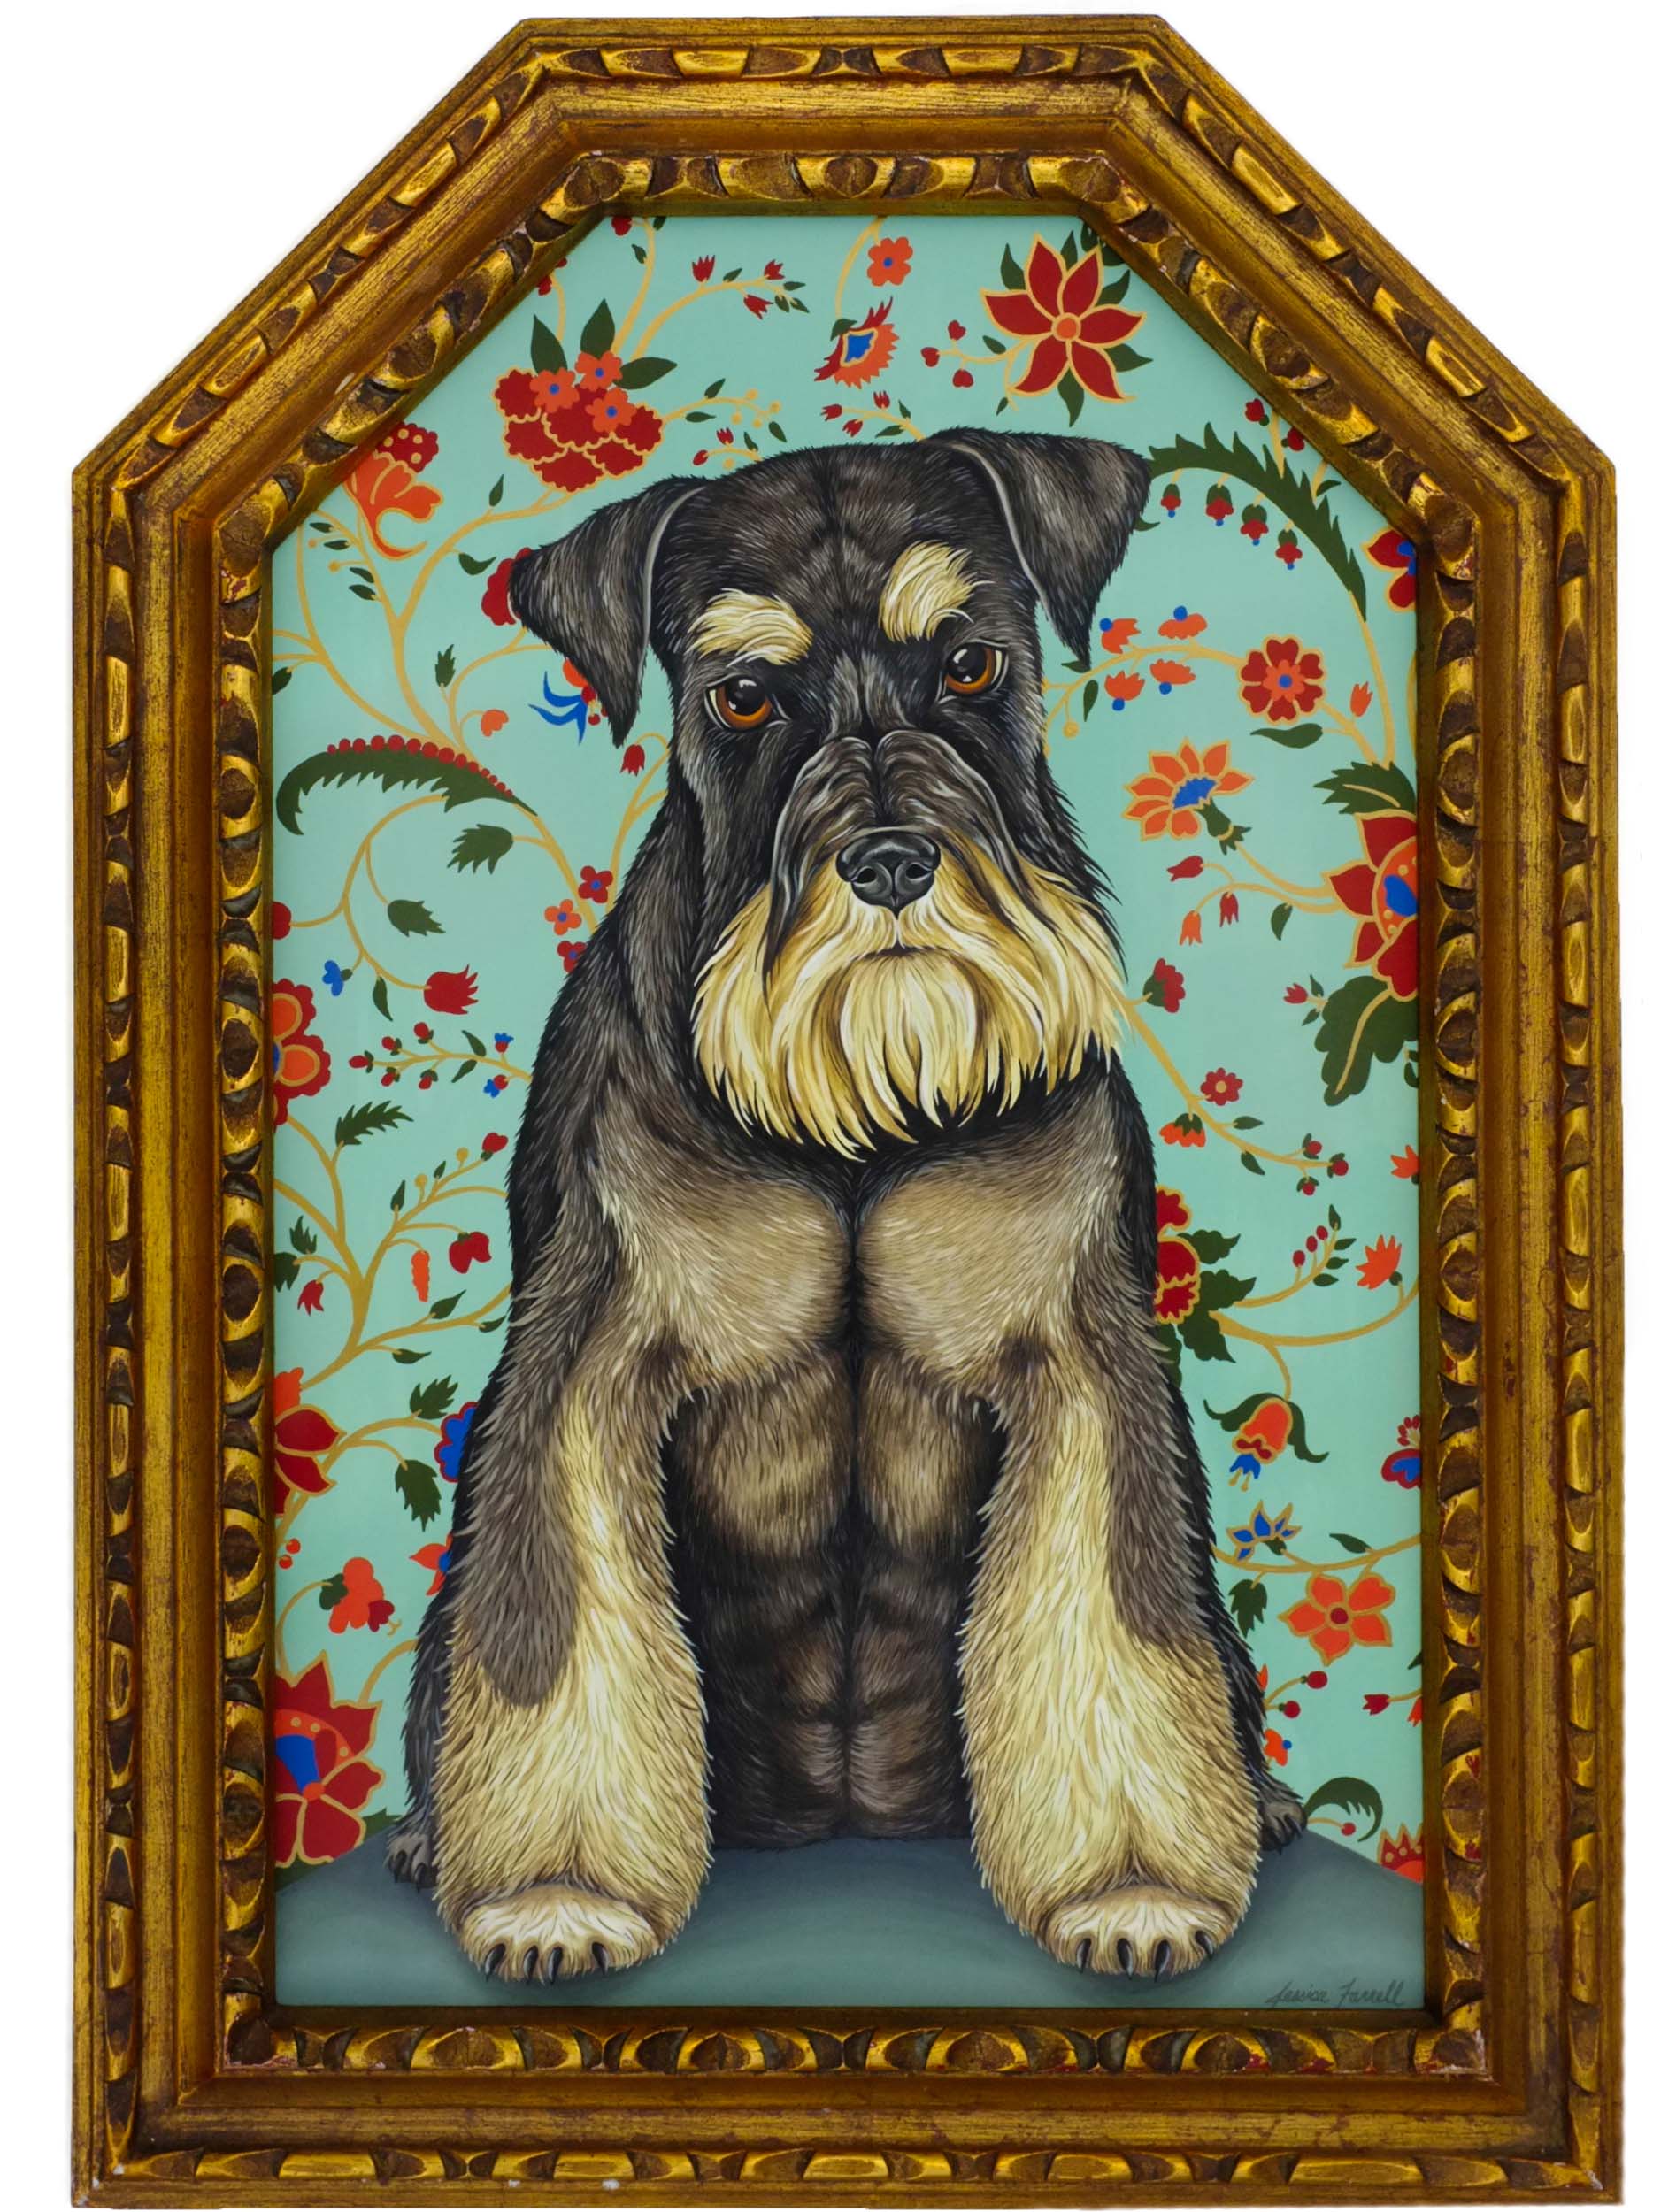   Miniature Schnauzer,  Acrylic on wood with vintage frame, 30 x 21 ¼ inches (framed)  (private collection) 